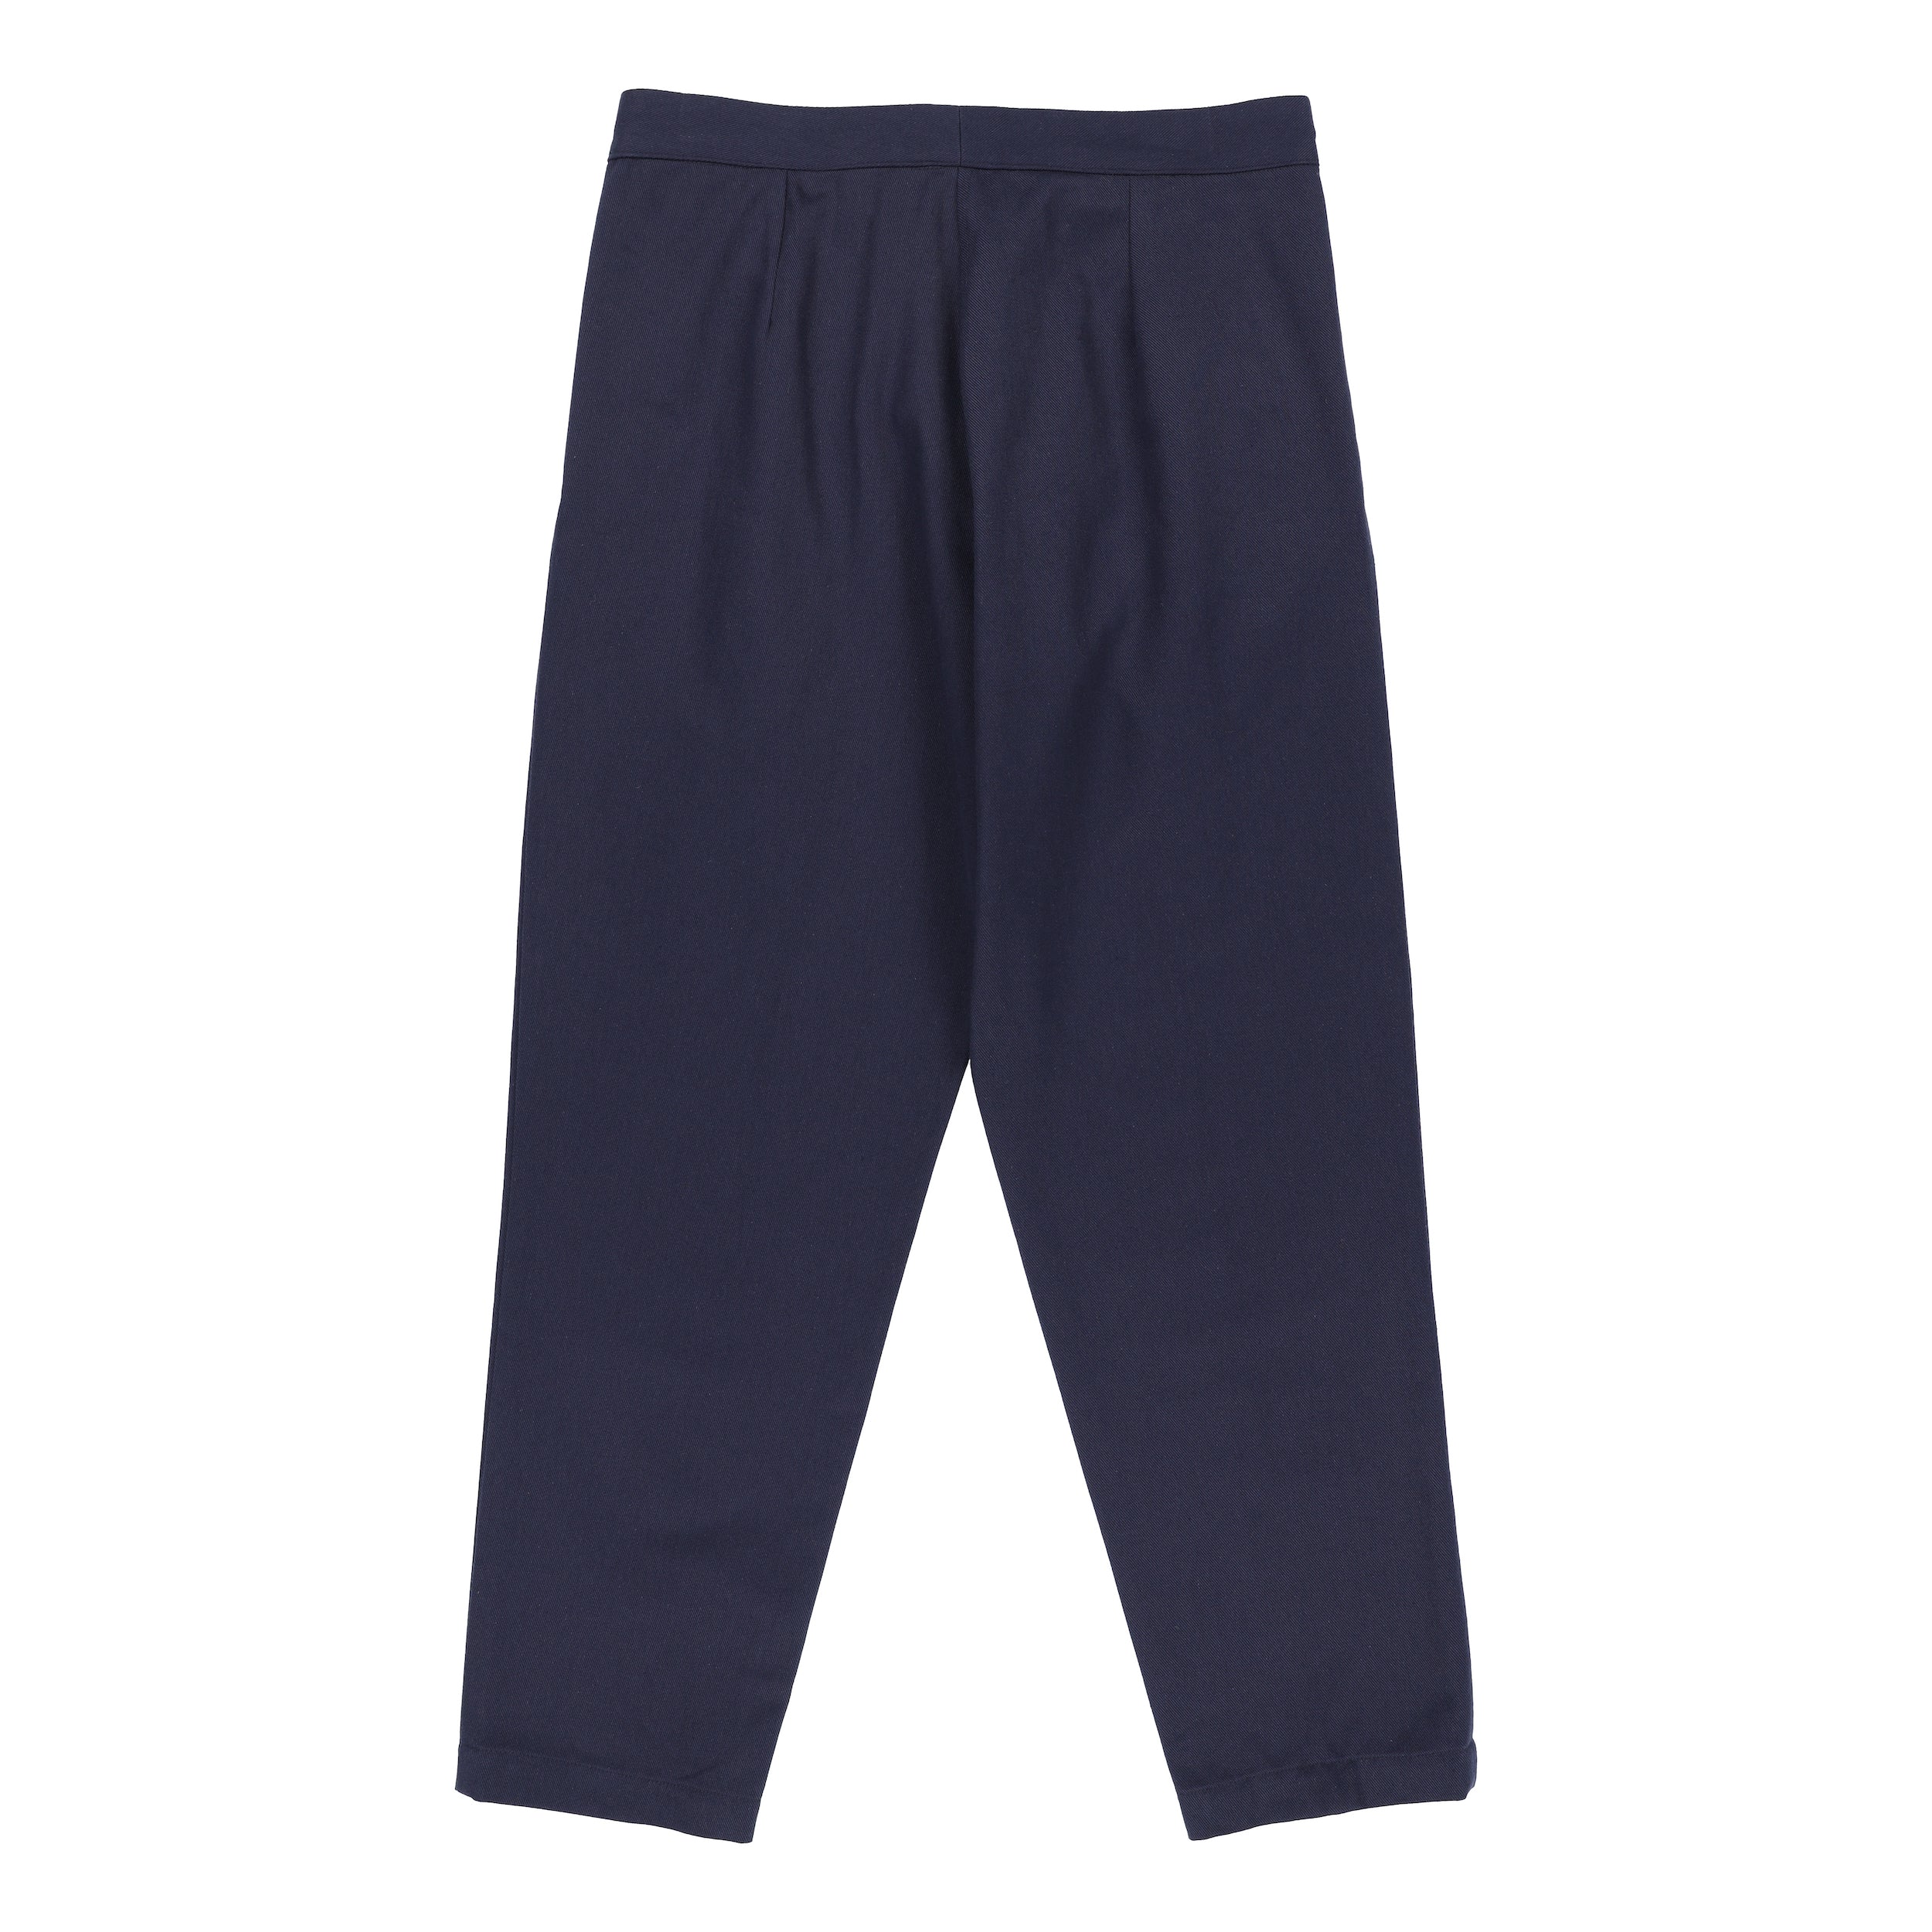 Carrier Company Cropped Trouser in Navy